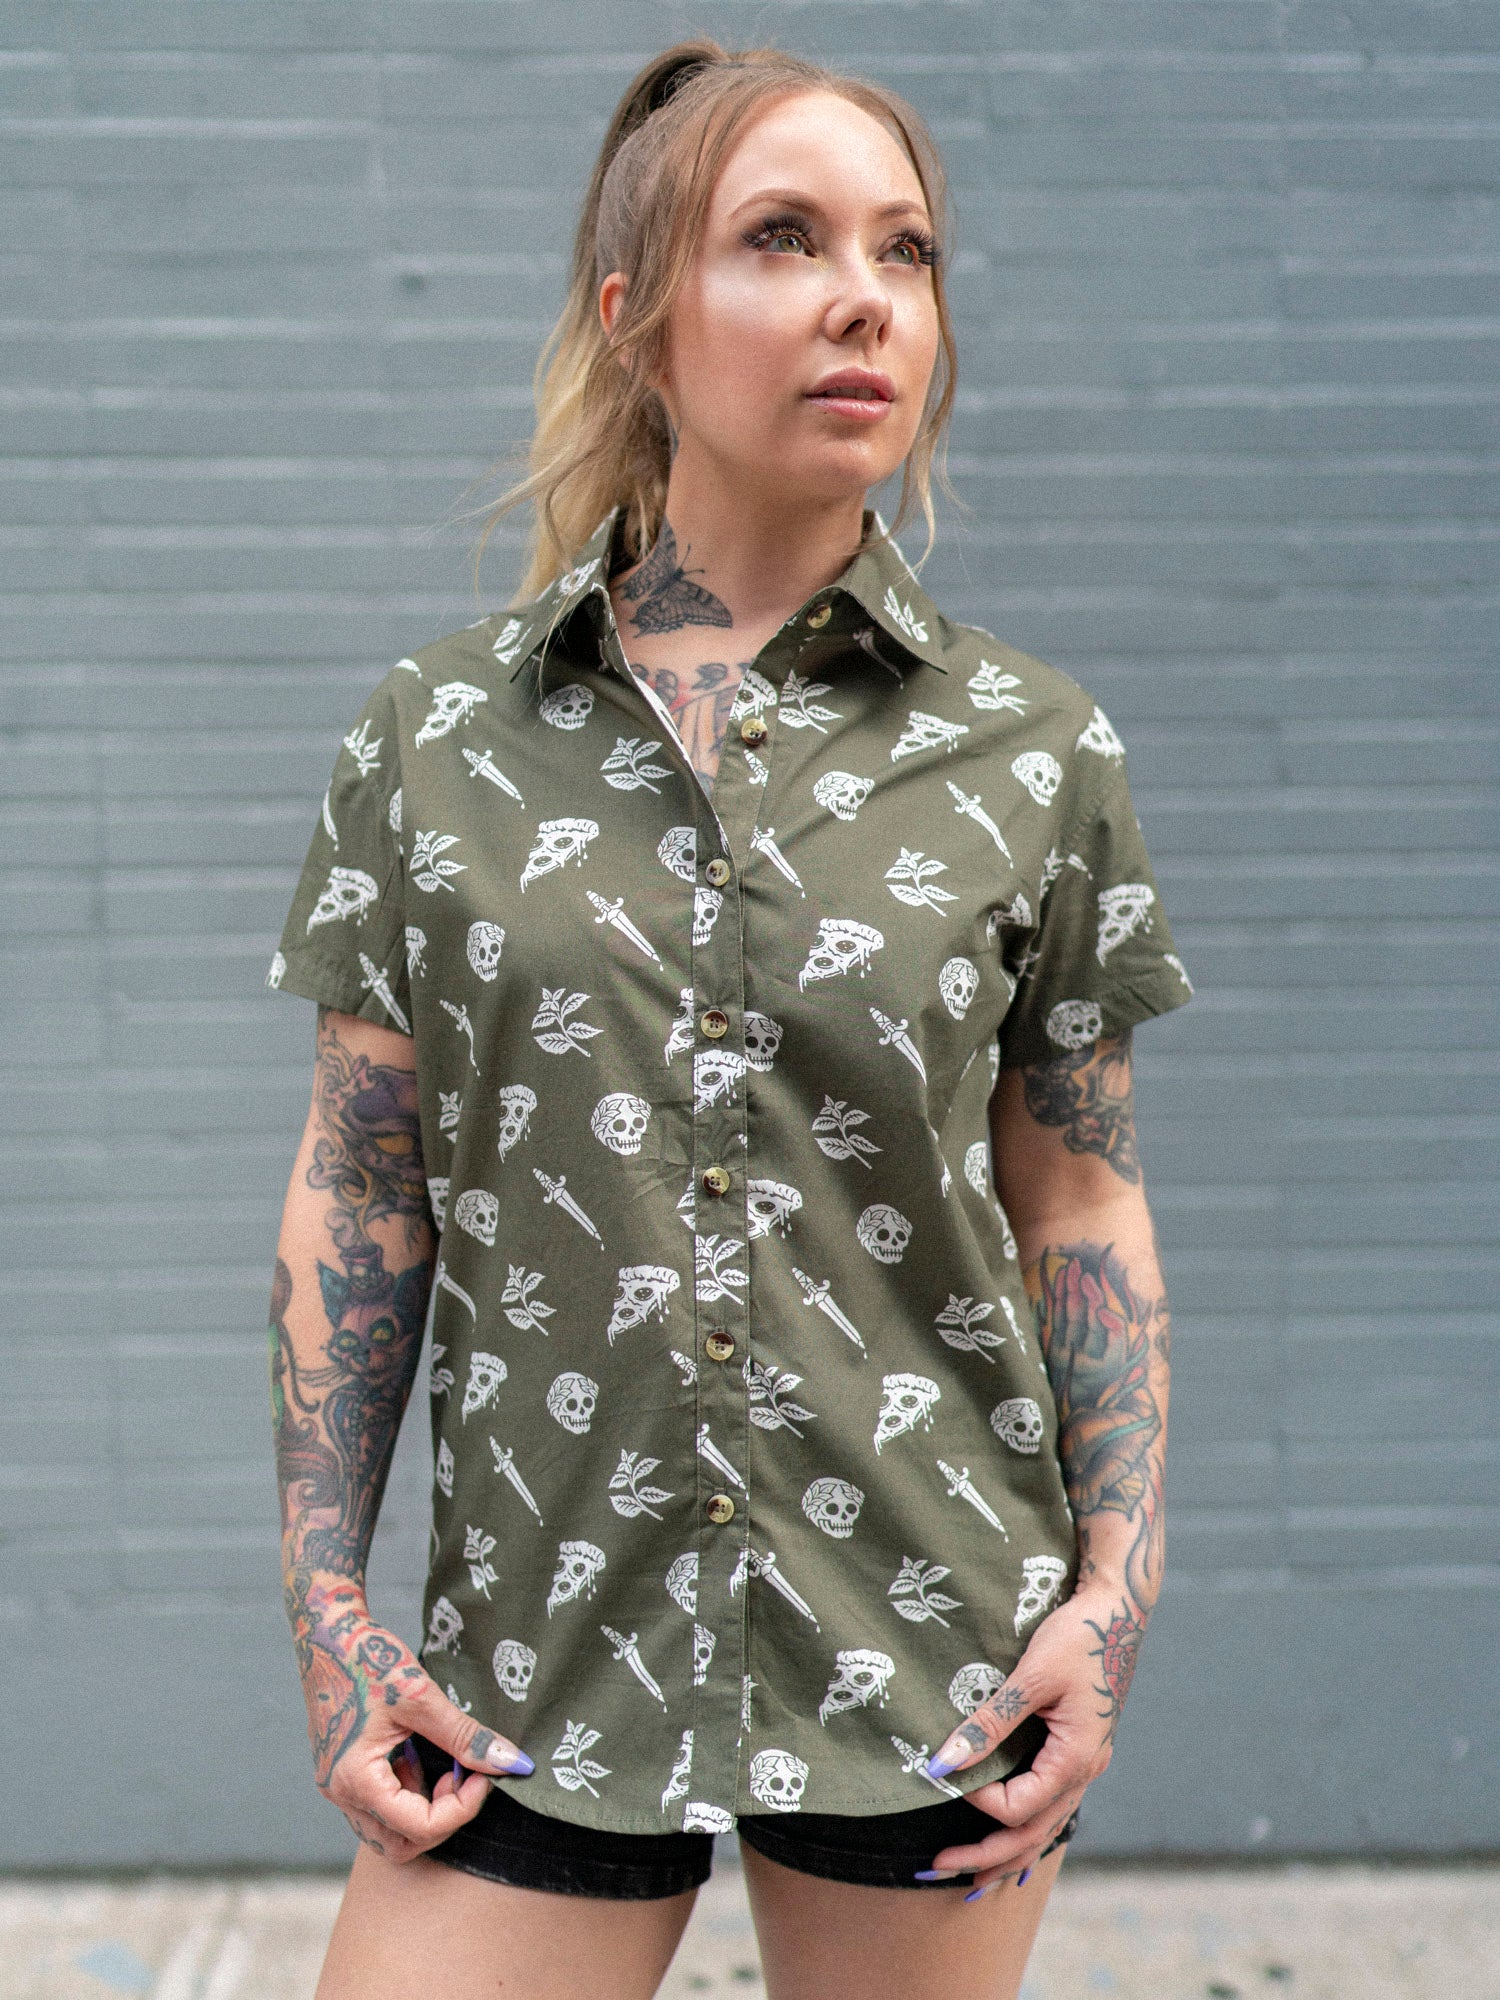 Pizza Slayer Women's Button Up